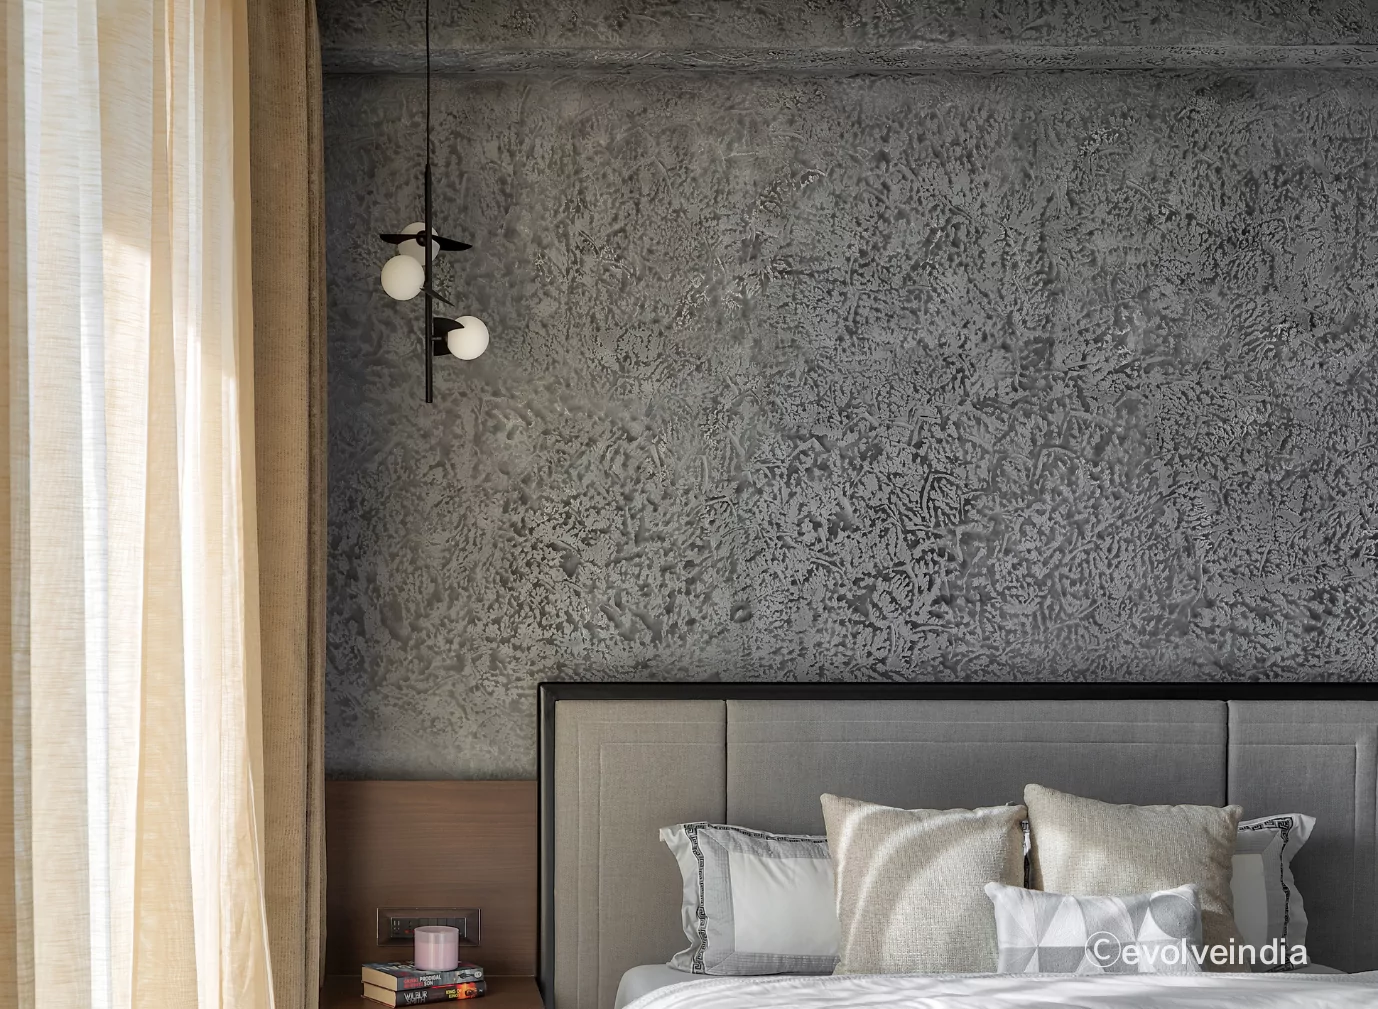 Monterry noir beauty concrete accent wall finish by Evolve India